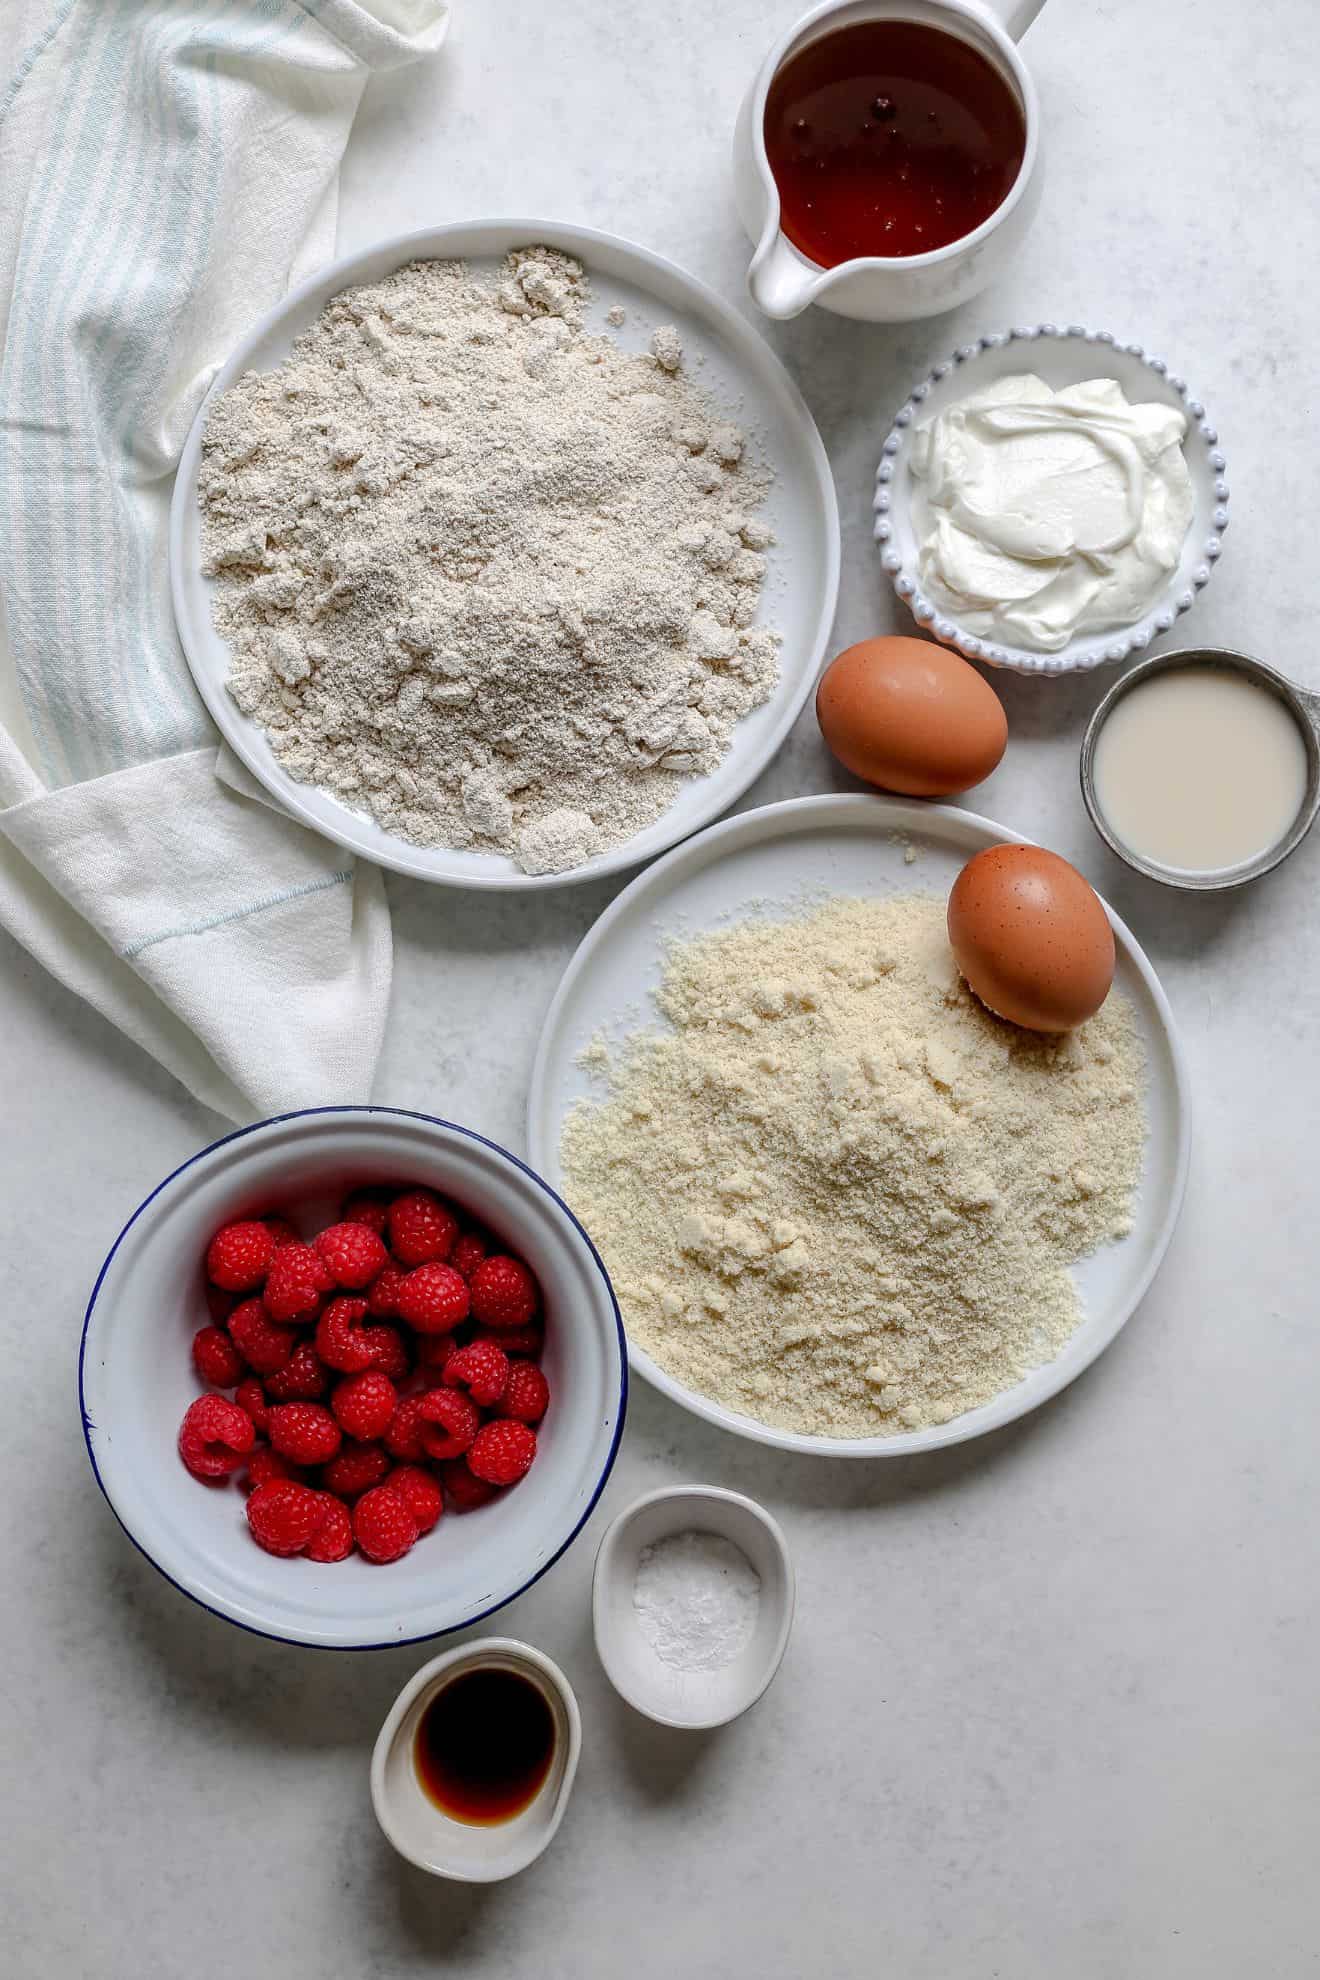 This is an overhead image of the ingredients needed for a raspberry cake. The oat flour, almond flour, yogurt, raspberries, eggs and other ingredients are on a white background.